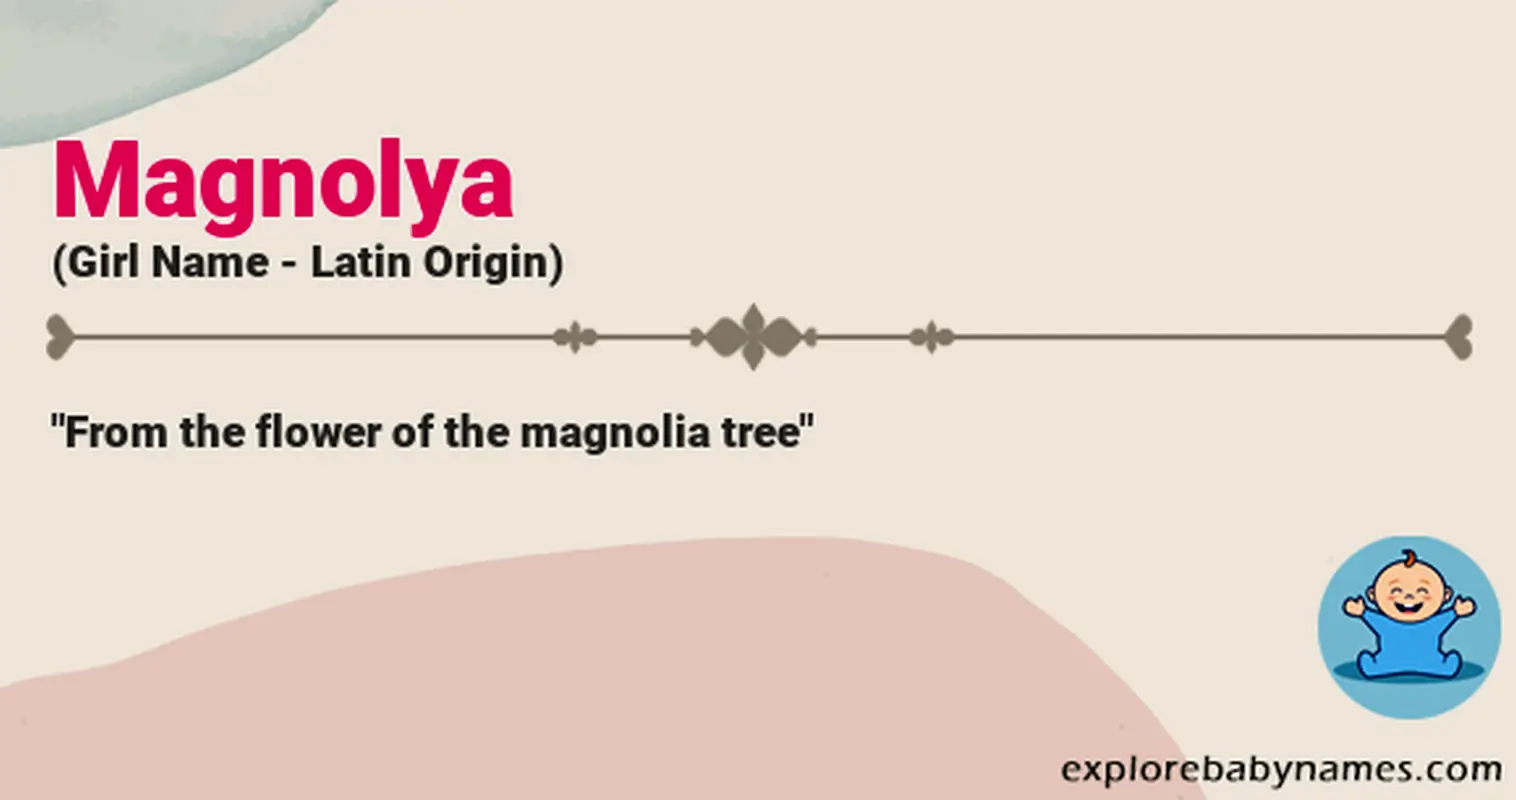 Meaning of Magnolya